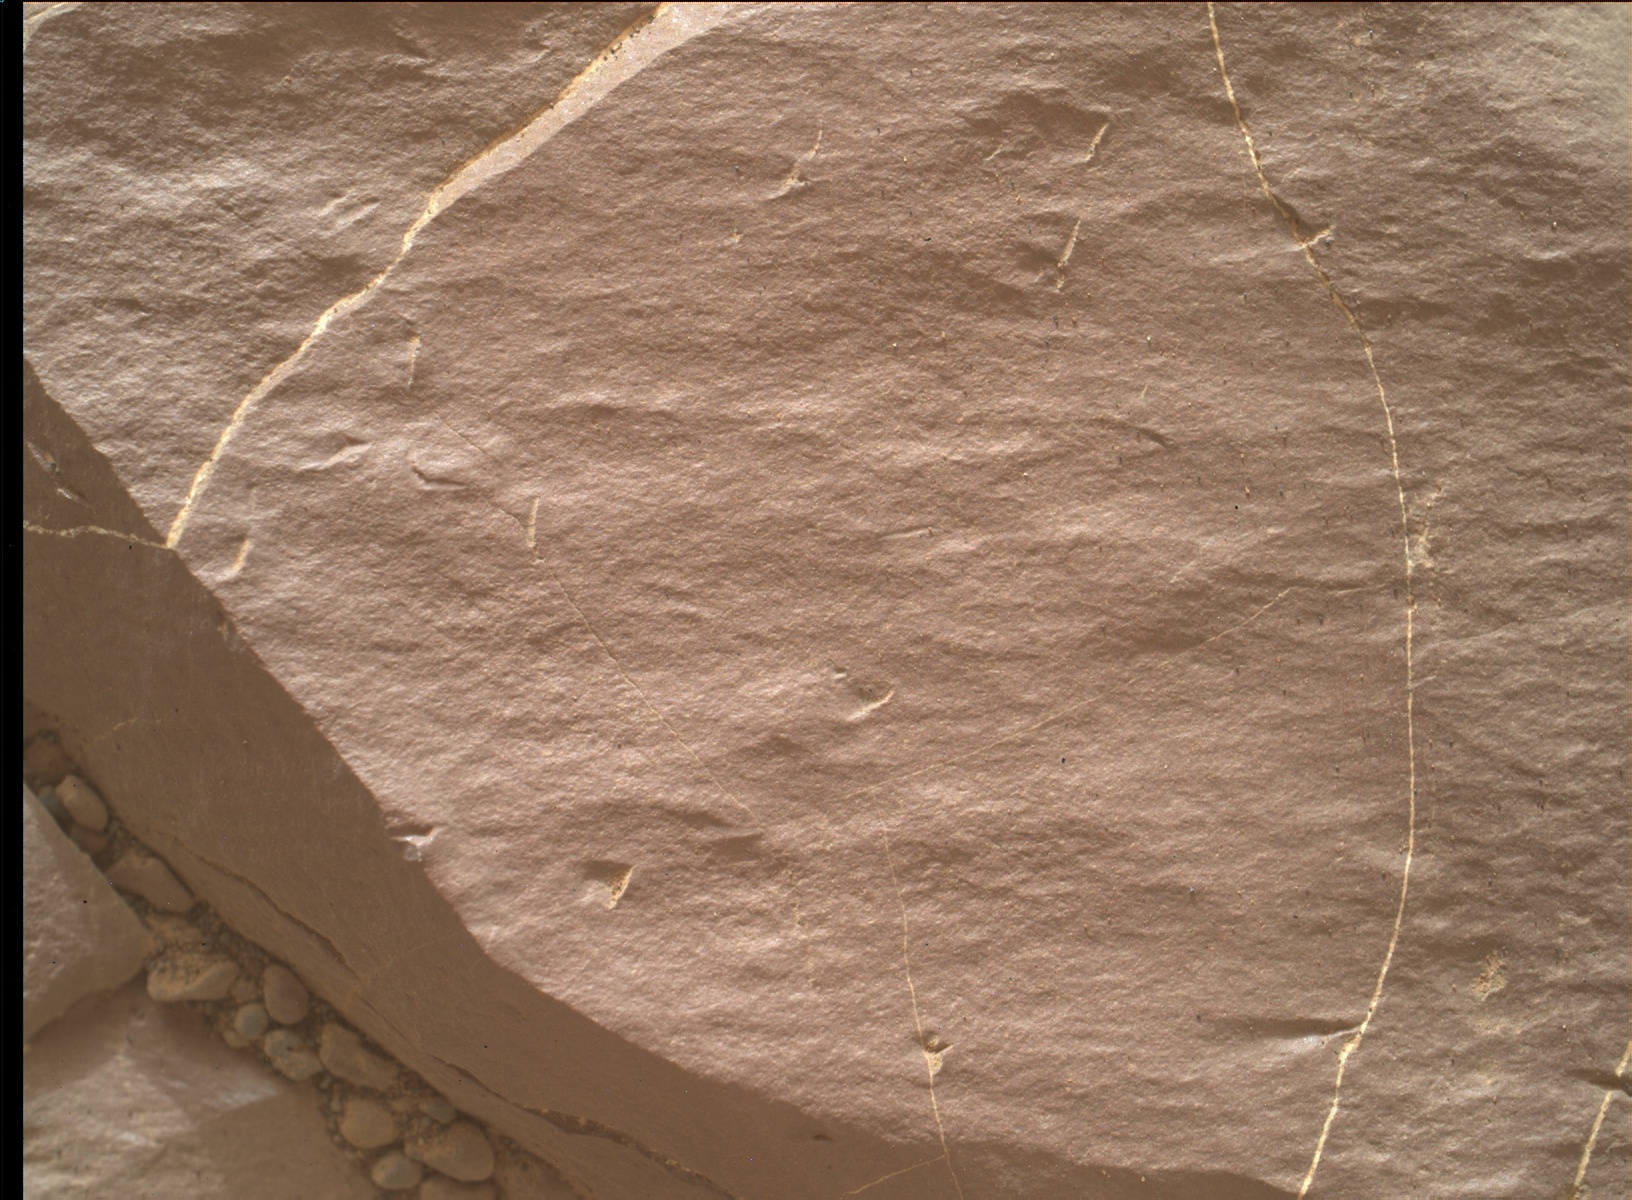 Nasa's Mars rover Curiosity acquired this image using its Mars Hand Lens Imager (MAHLI) on Sol 2254